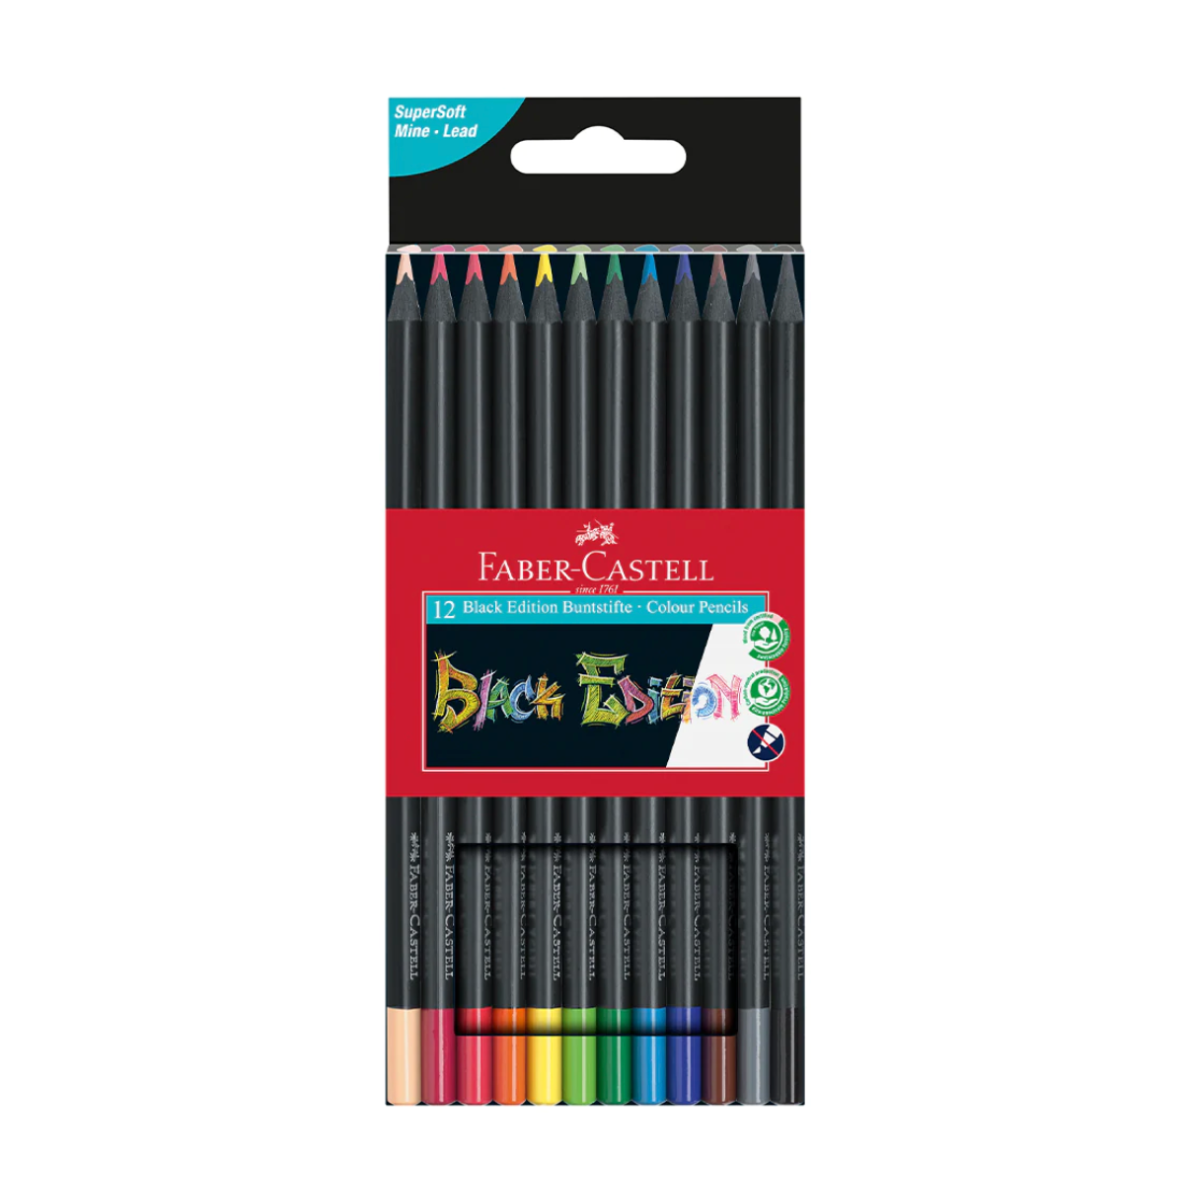 Faber-Castell Pencil Crayons Black Edition Set of 12